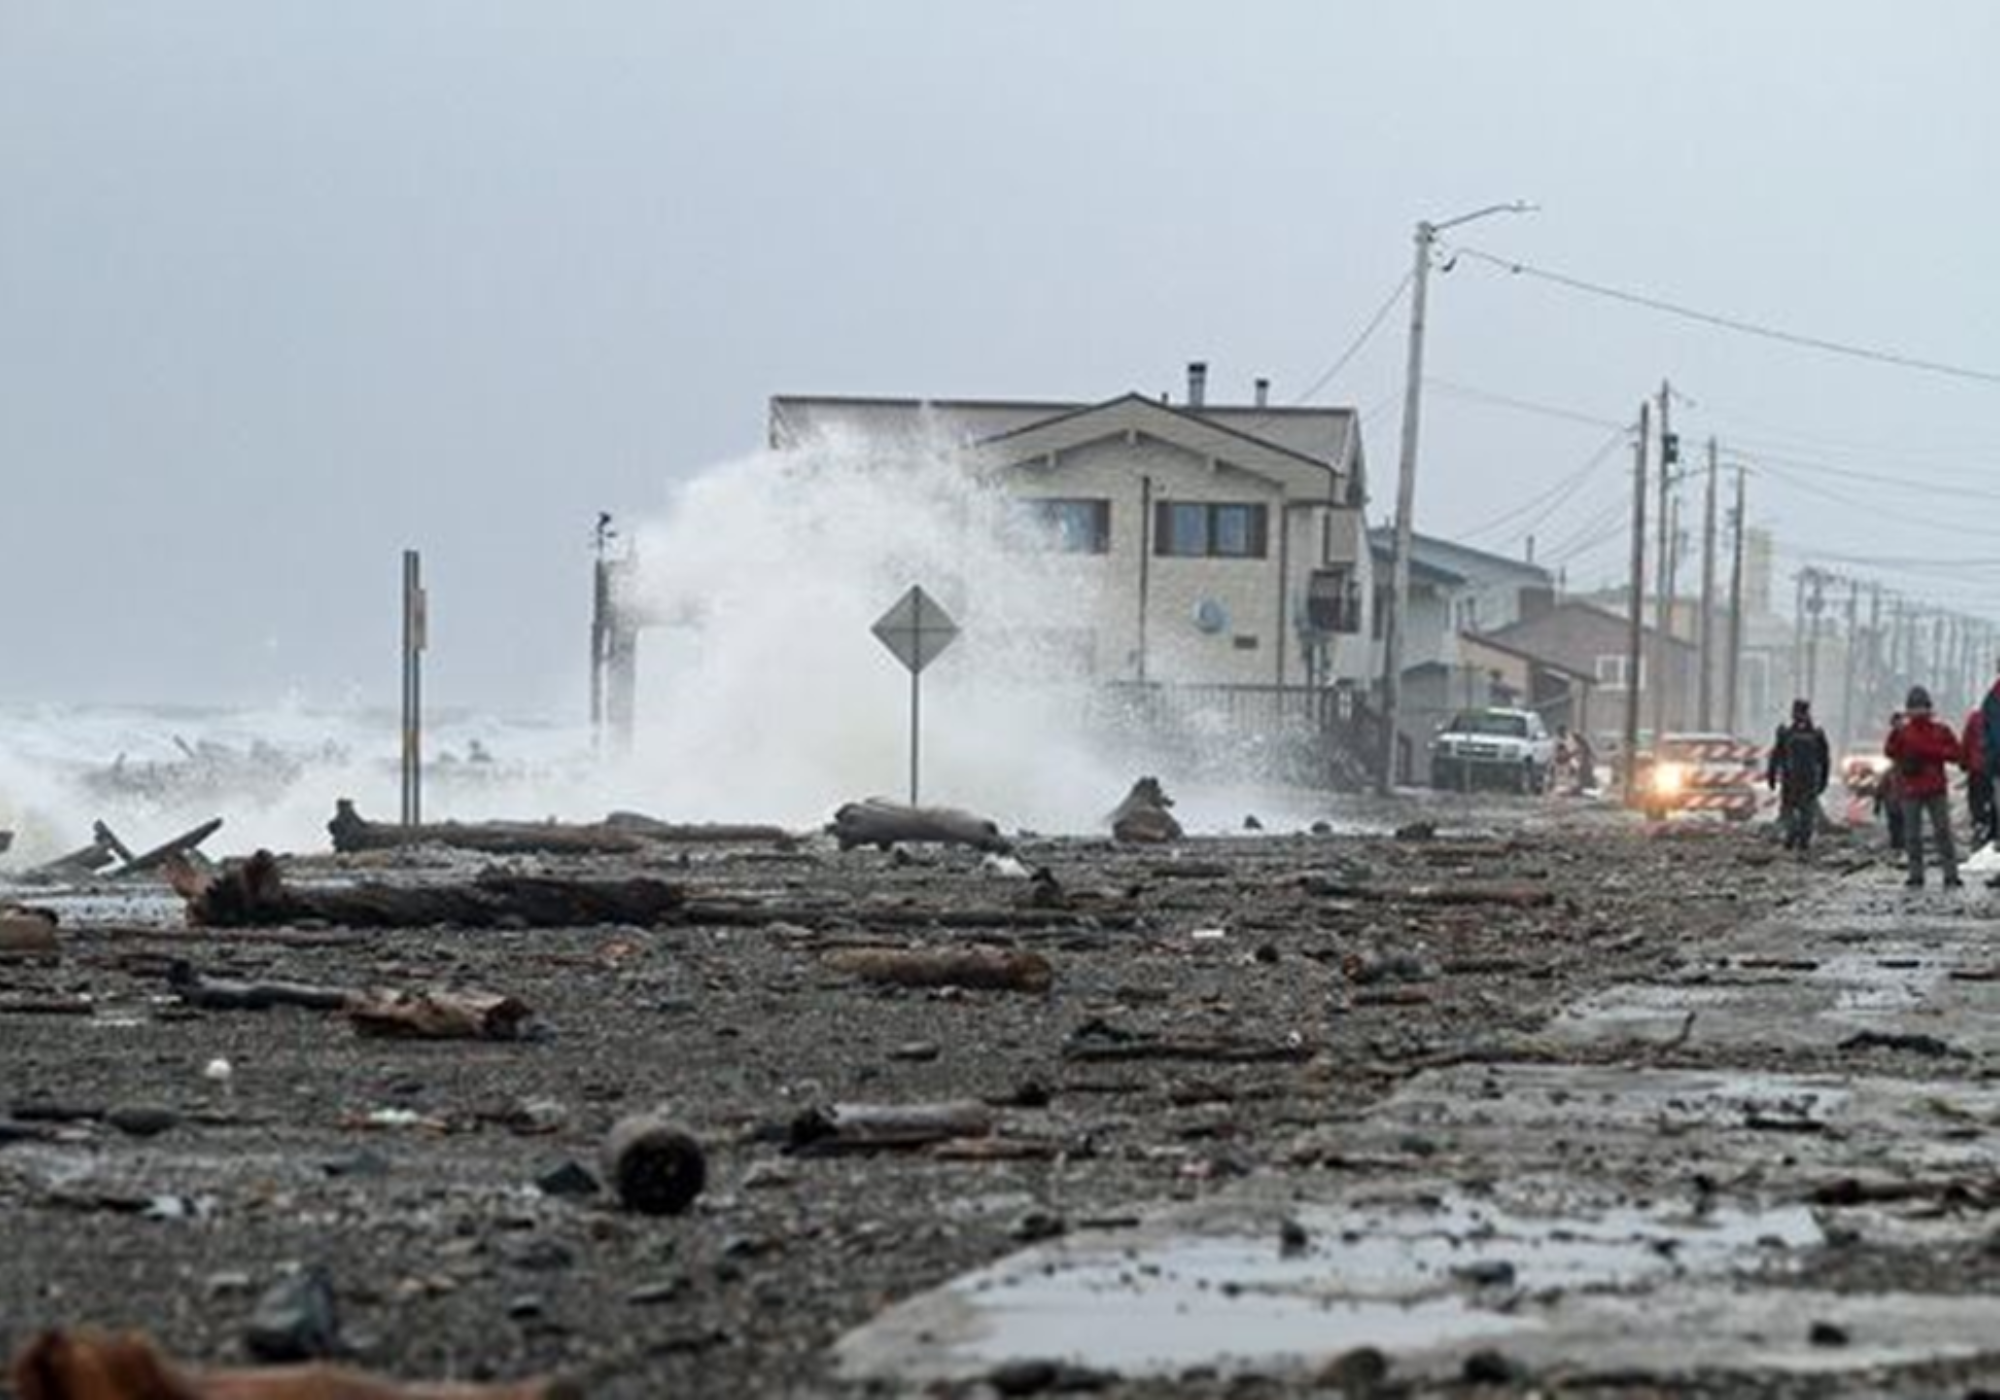 Click to view larger image: 2011 Nome storm